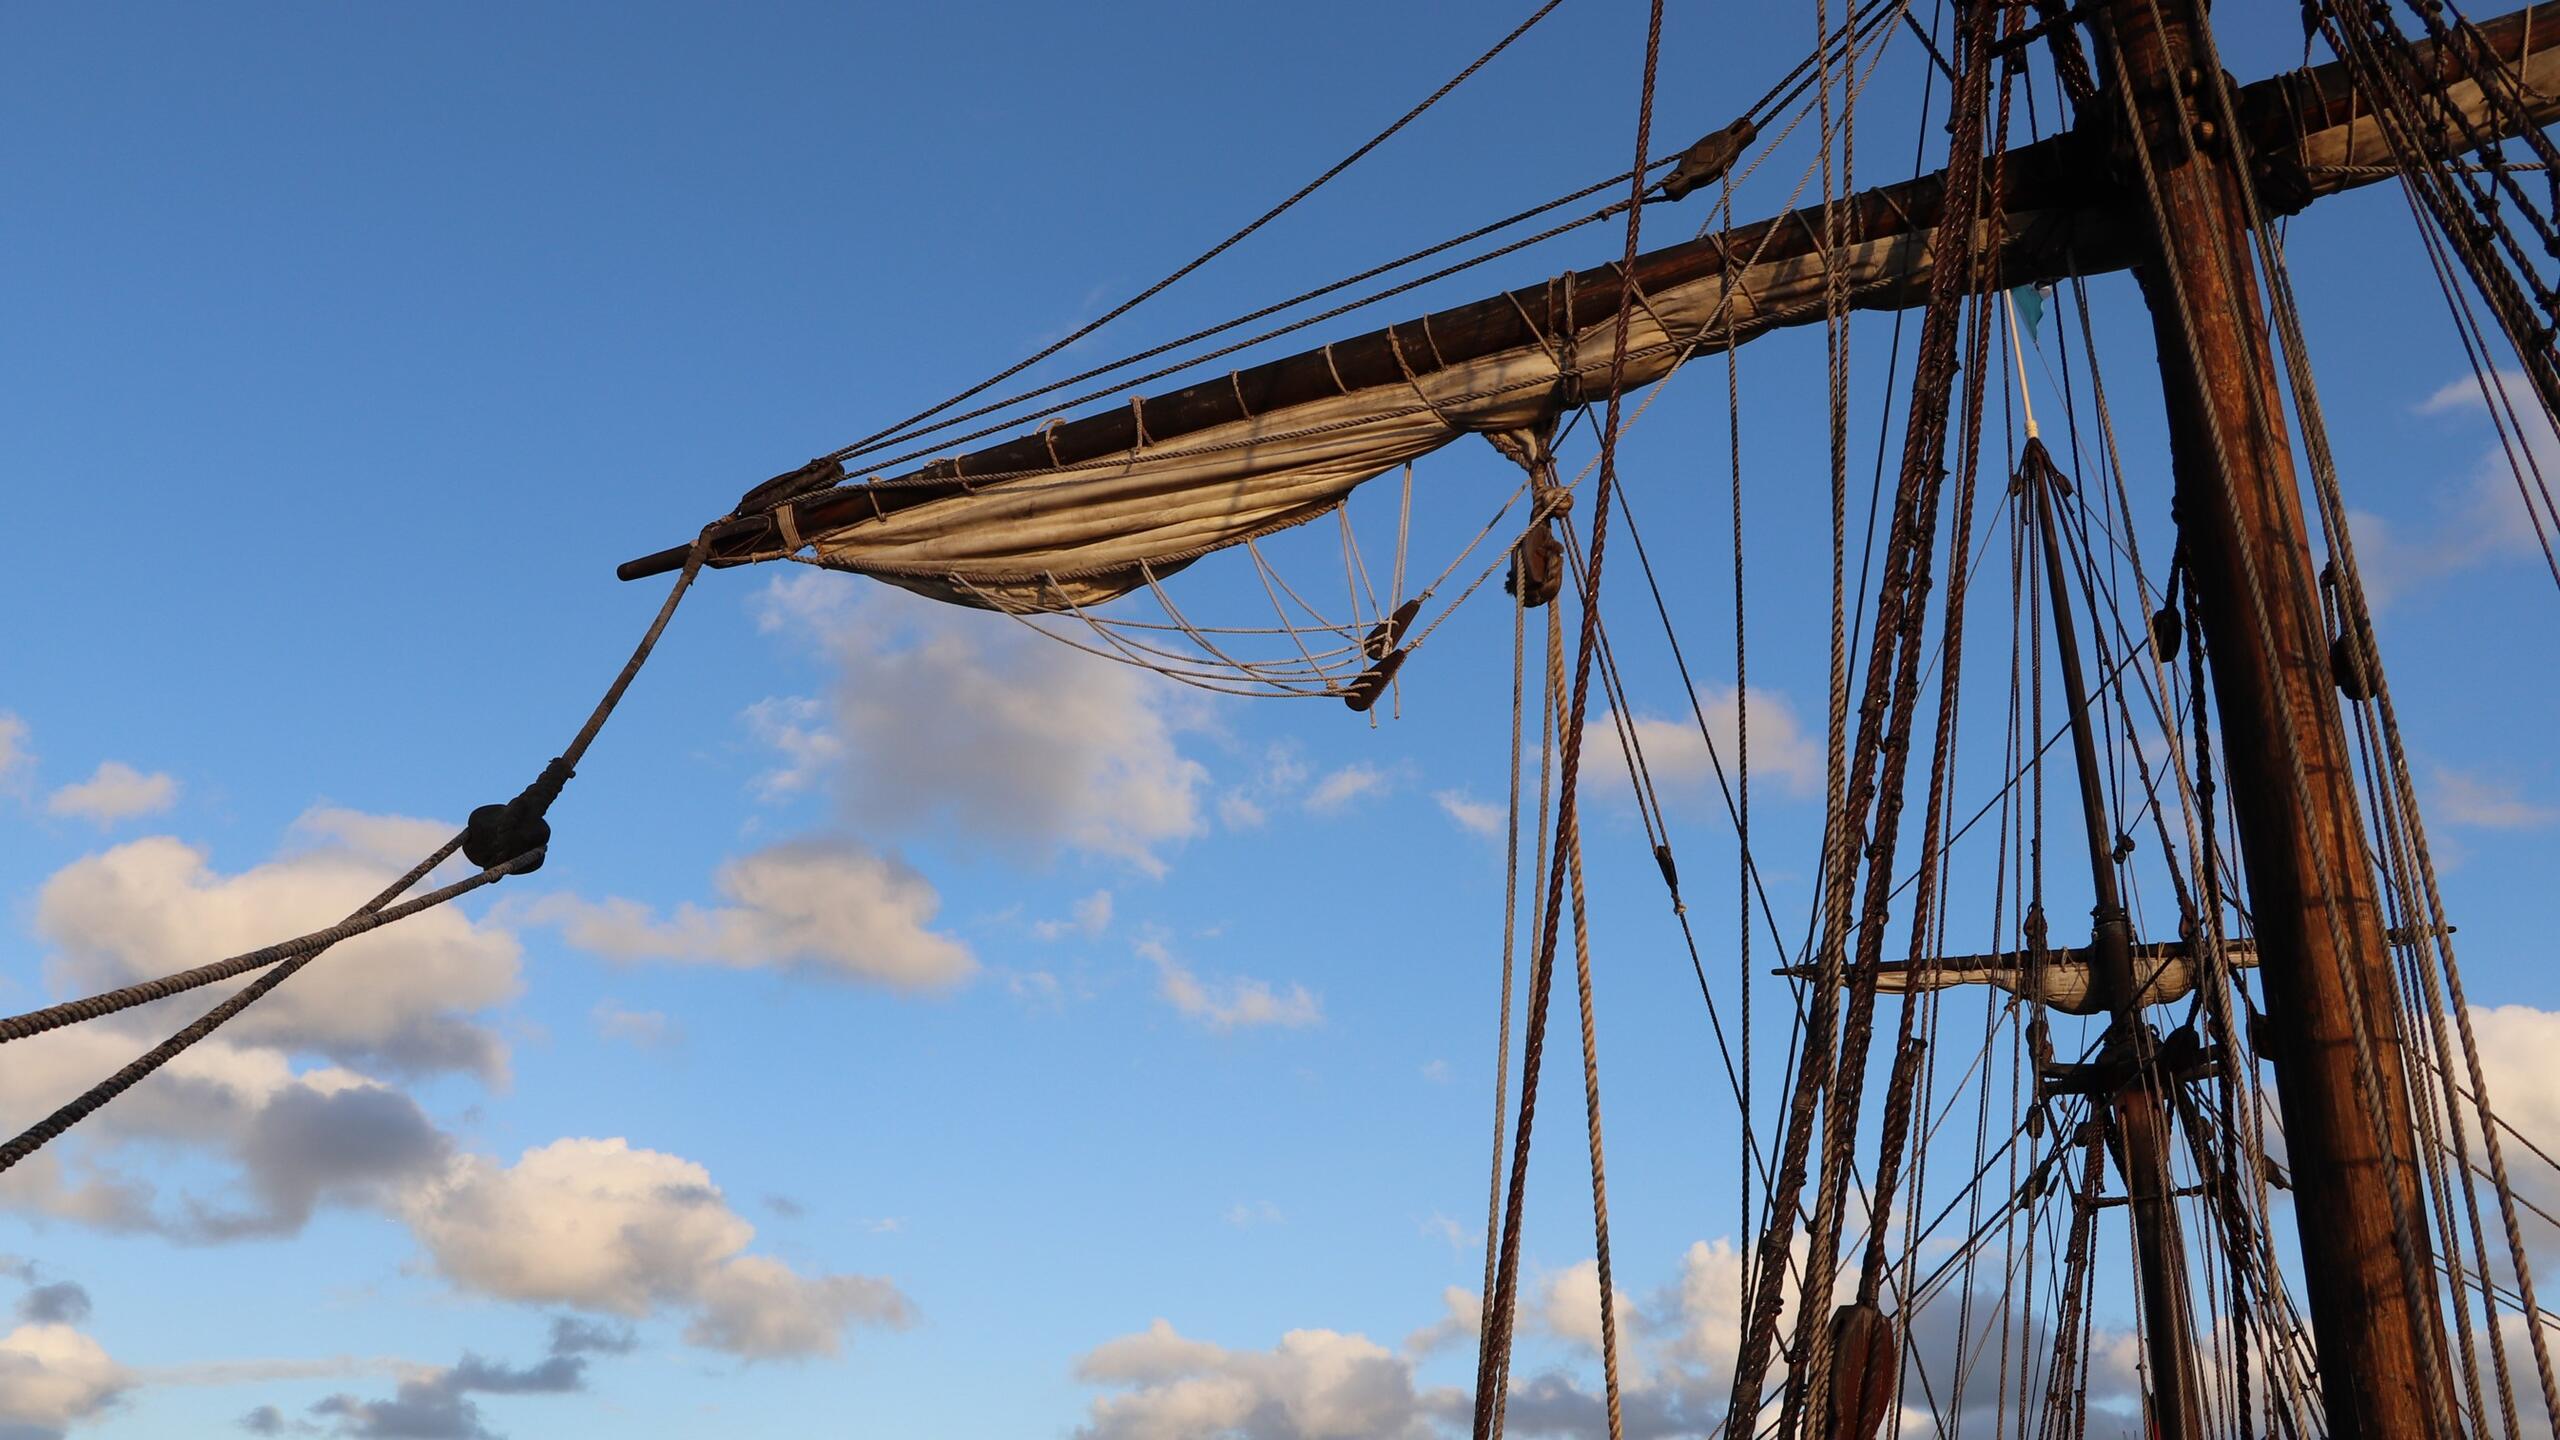 tall ship masts and rope with blue sky and clouds